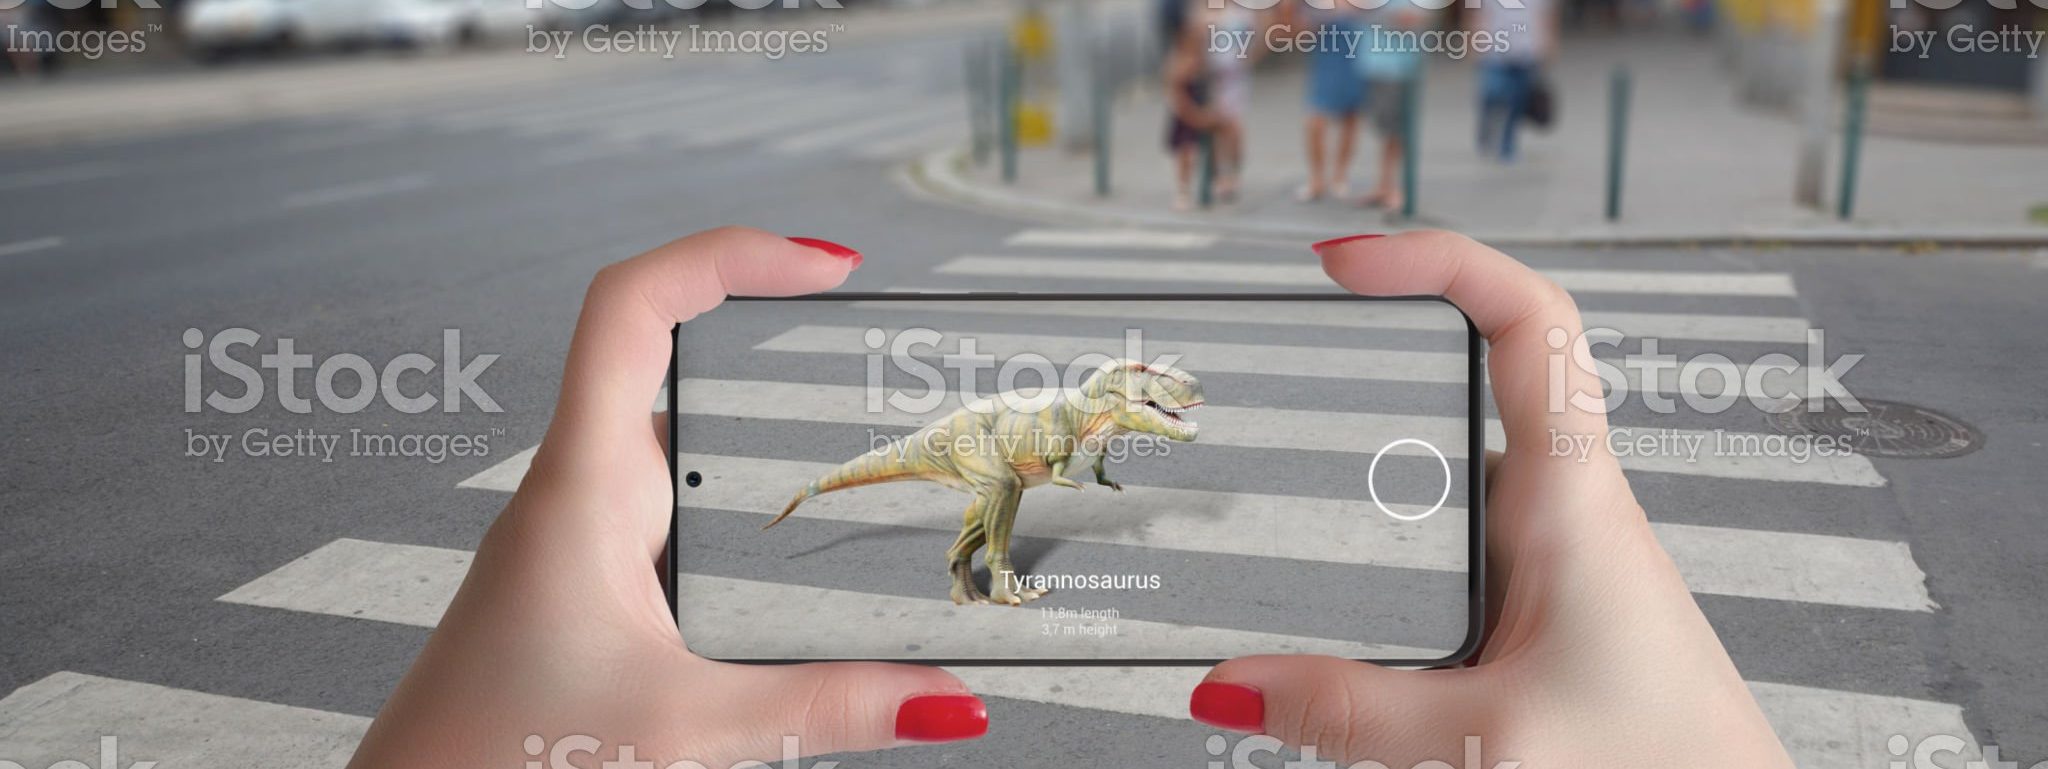 3d projection of dinosaurs on the street with smart phone and augmented technology concept